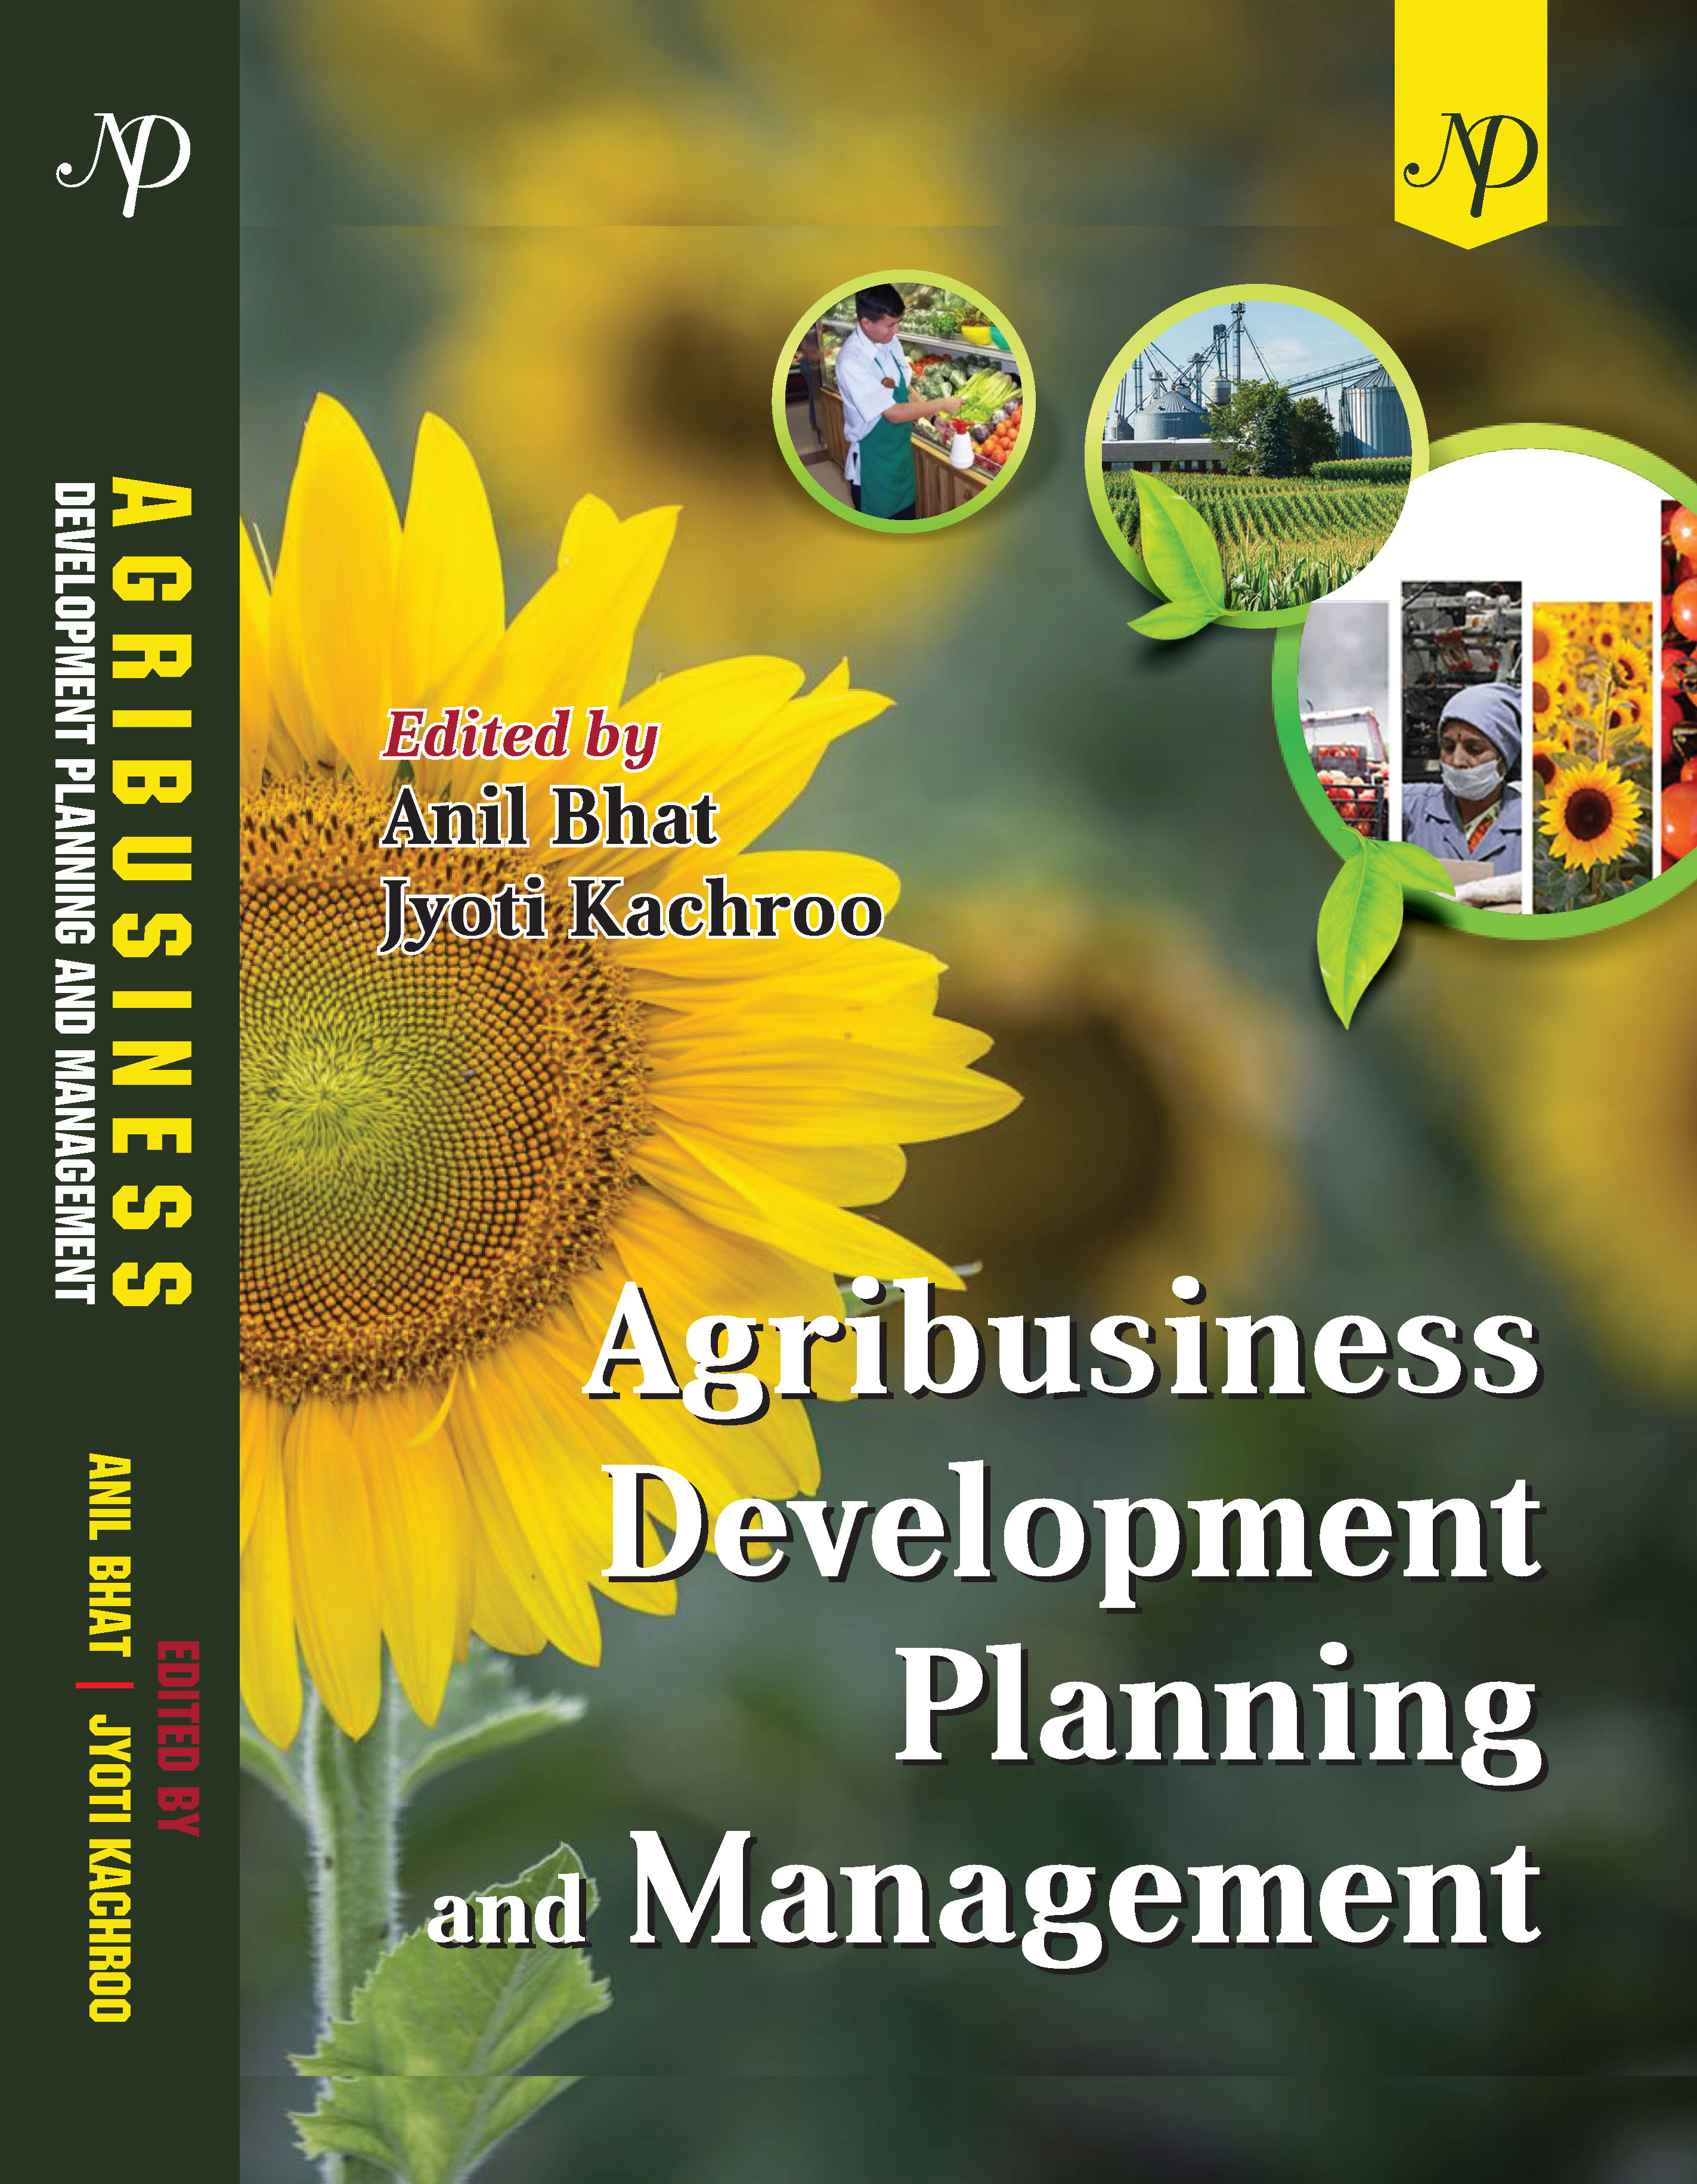 Agribusiness Development Planning and Management Cover.jpg